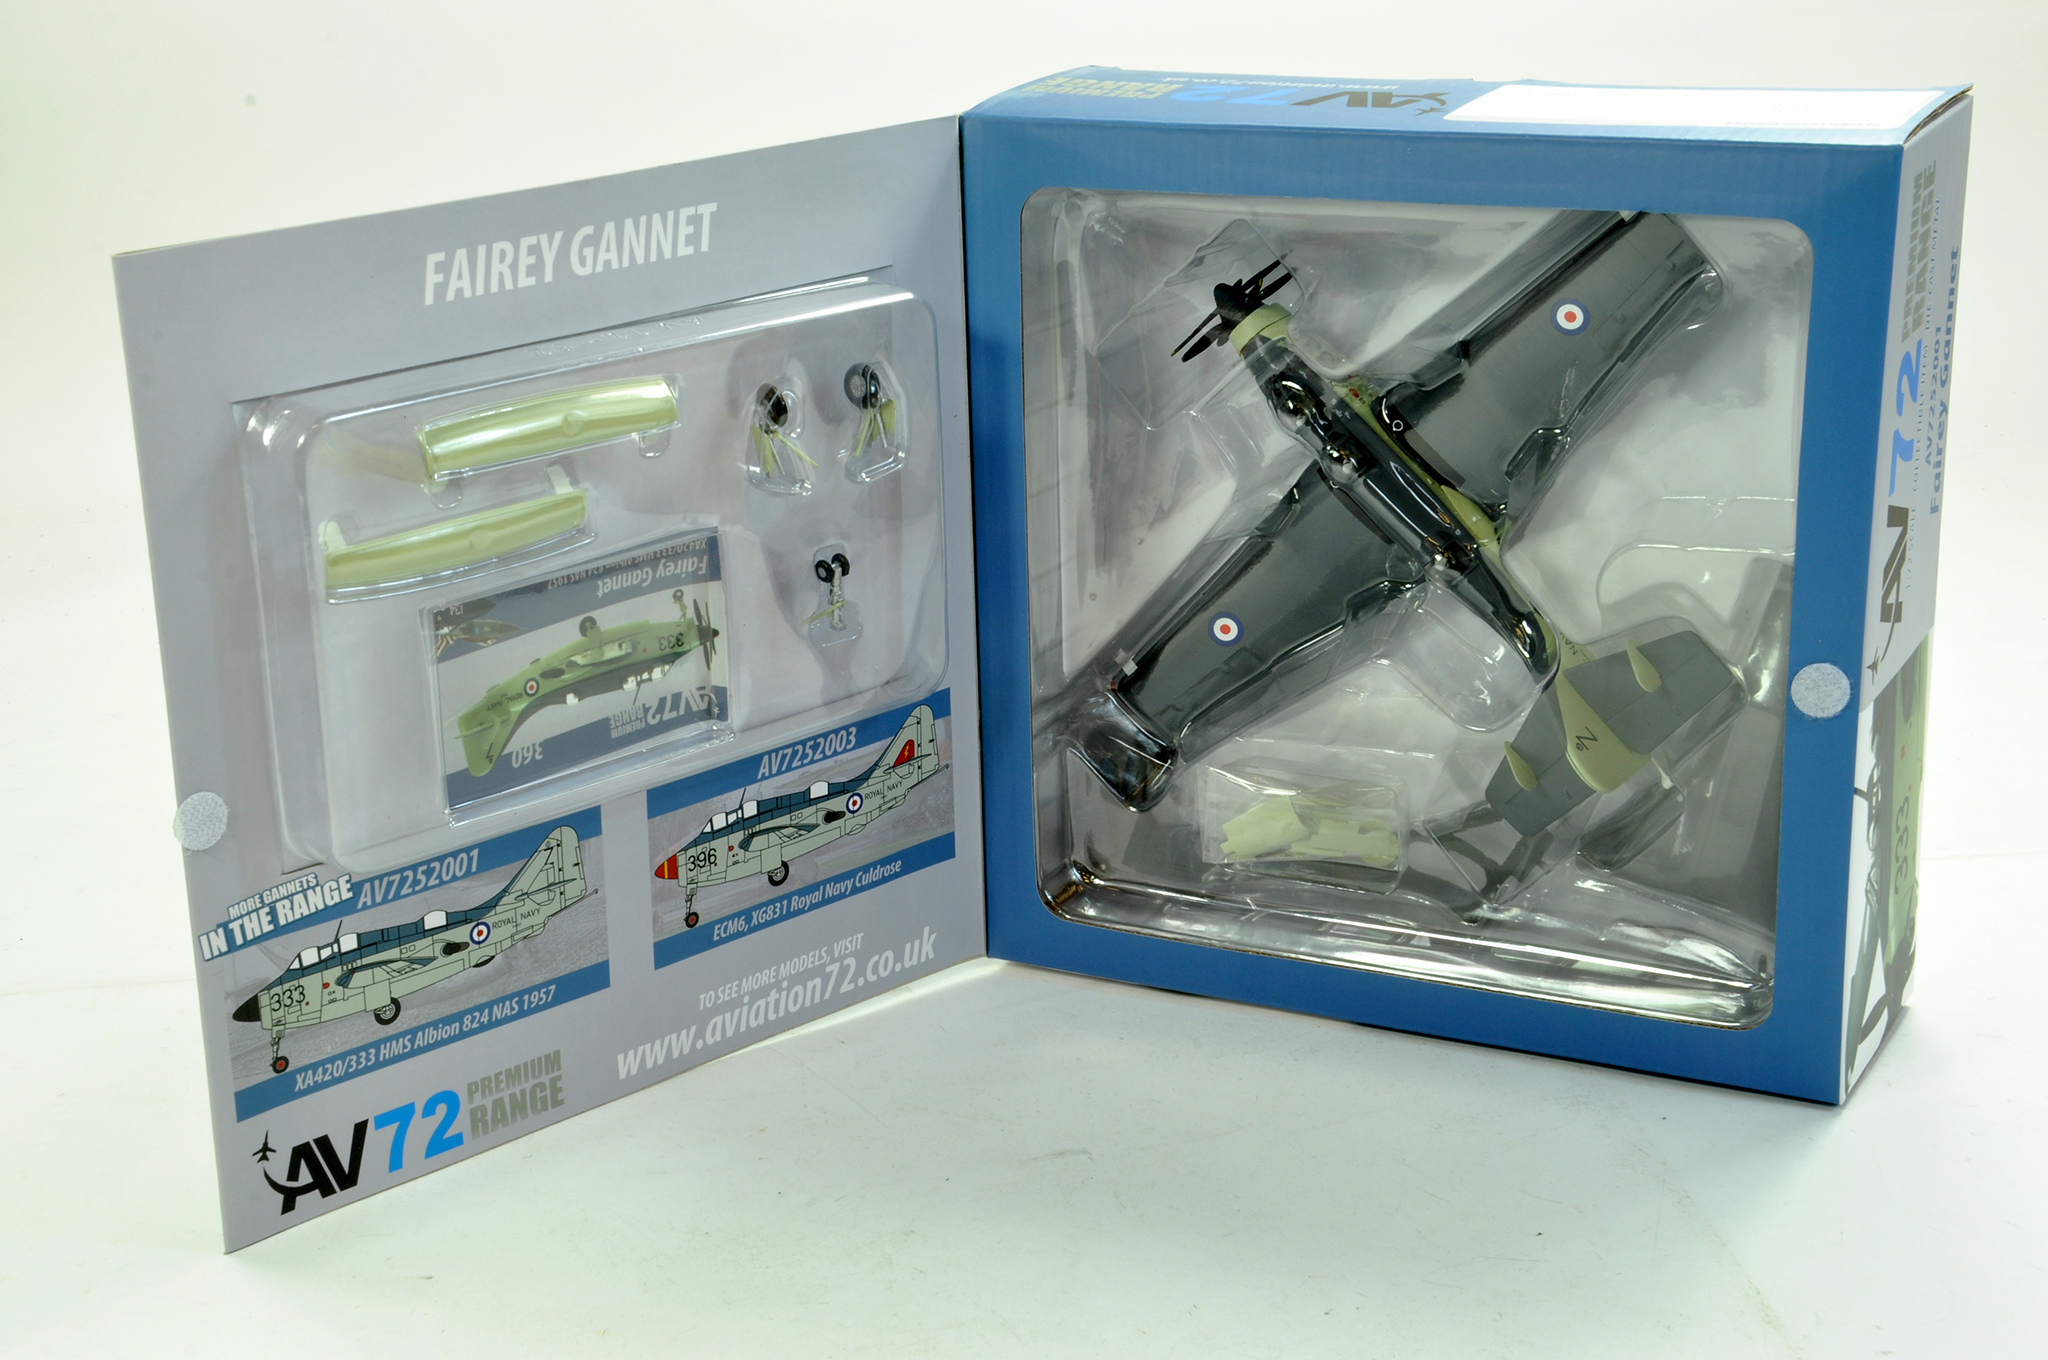 Model Aircraft Issue comprising 1/72 issue, AV72 Fairey Gannet. Note important condition report